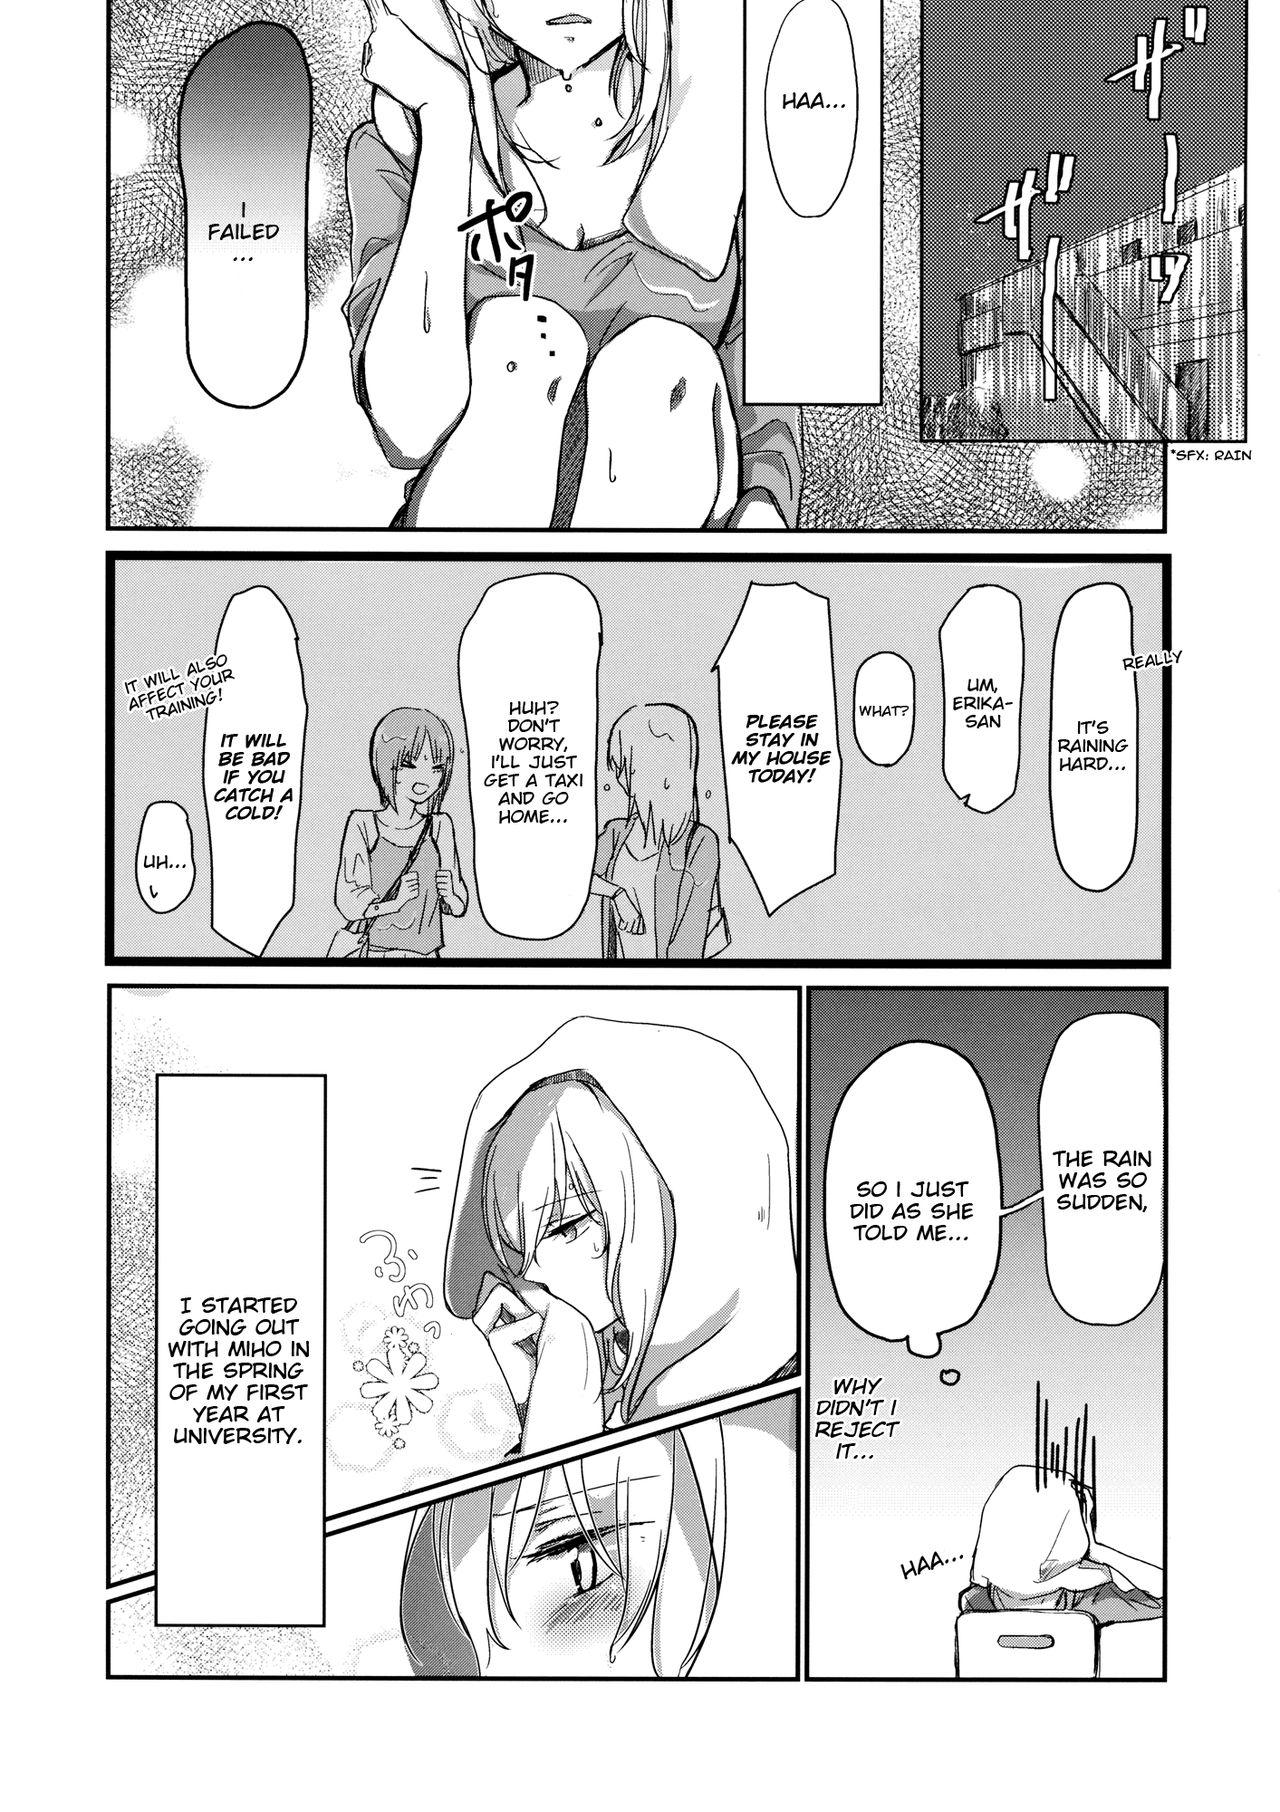 Orgasms for the first time - Girls und panzer Domina - Page 3